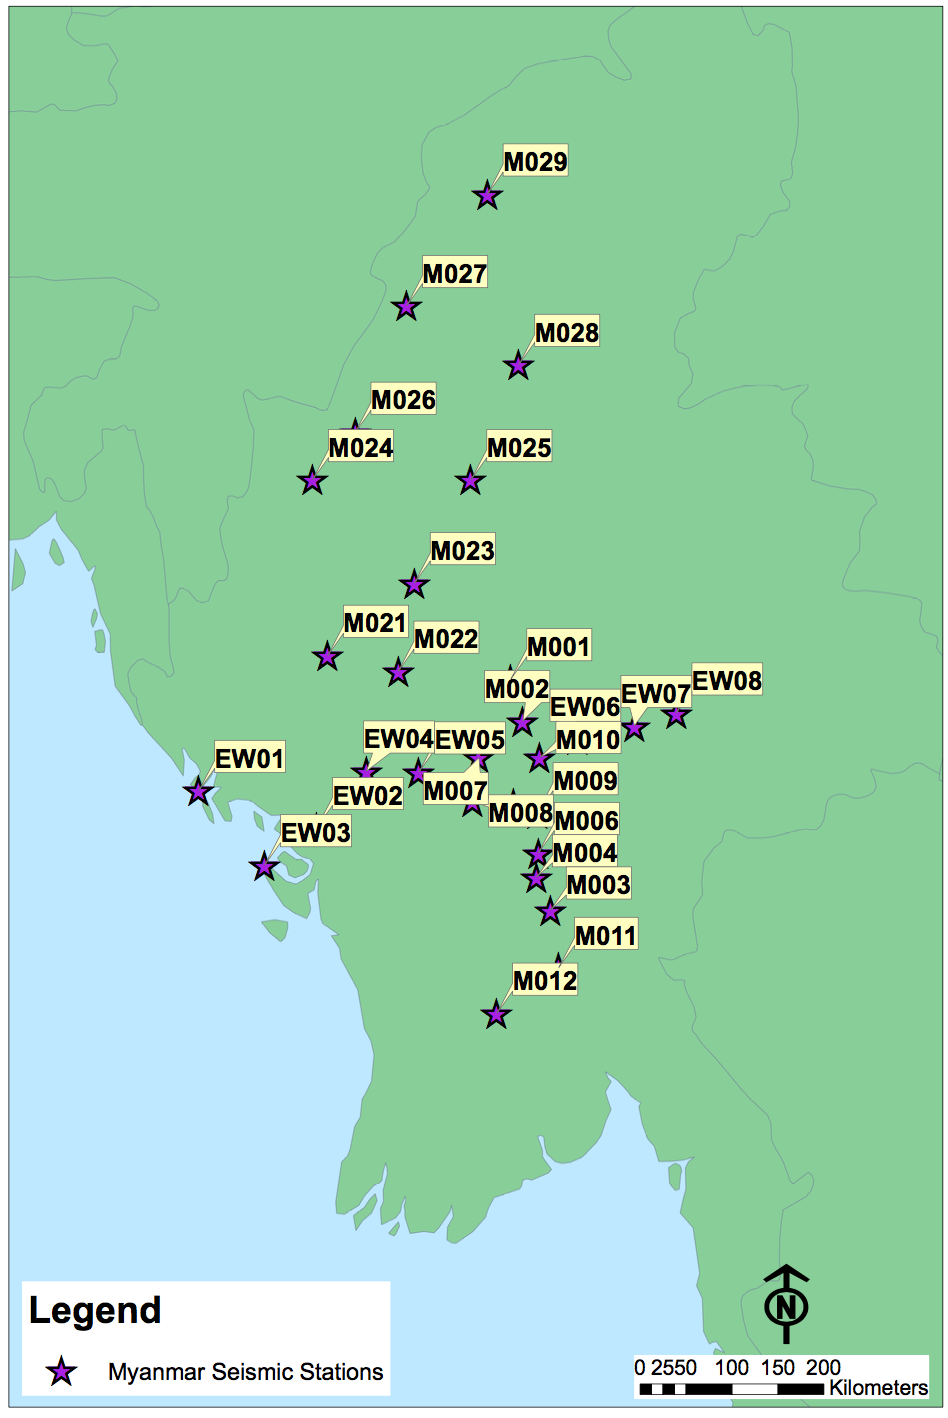 The Myanmar Seismic Network consists of 30 broadband seismic stations scattered throughout the country (Source: EOS Technical Office)